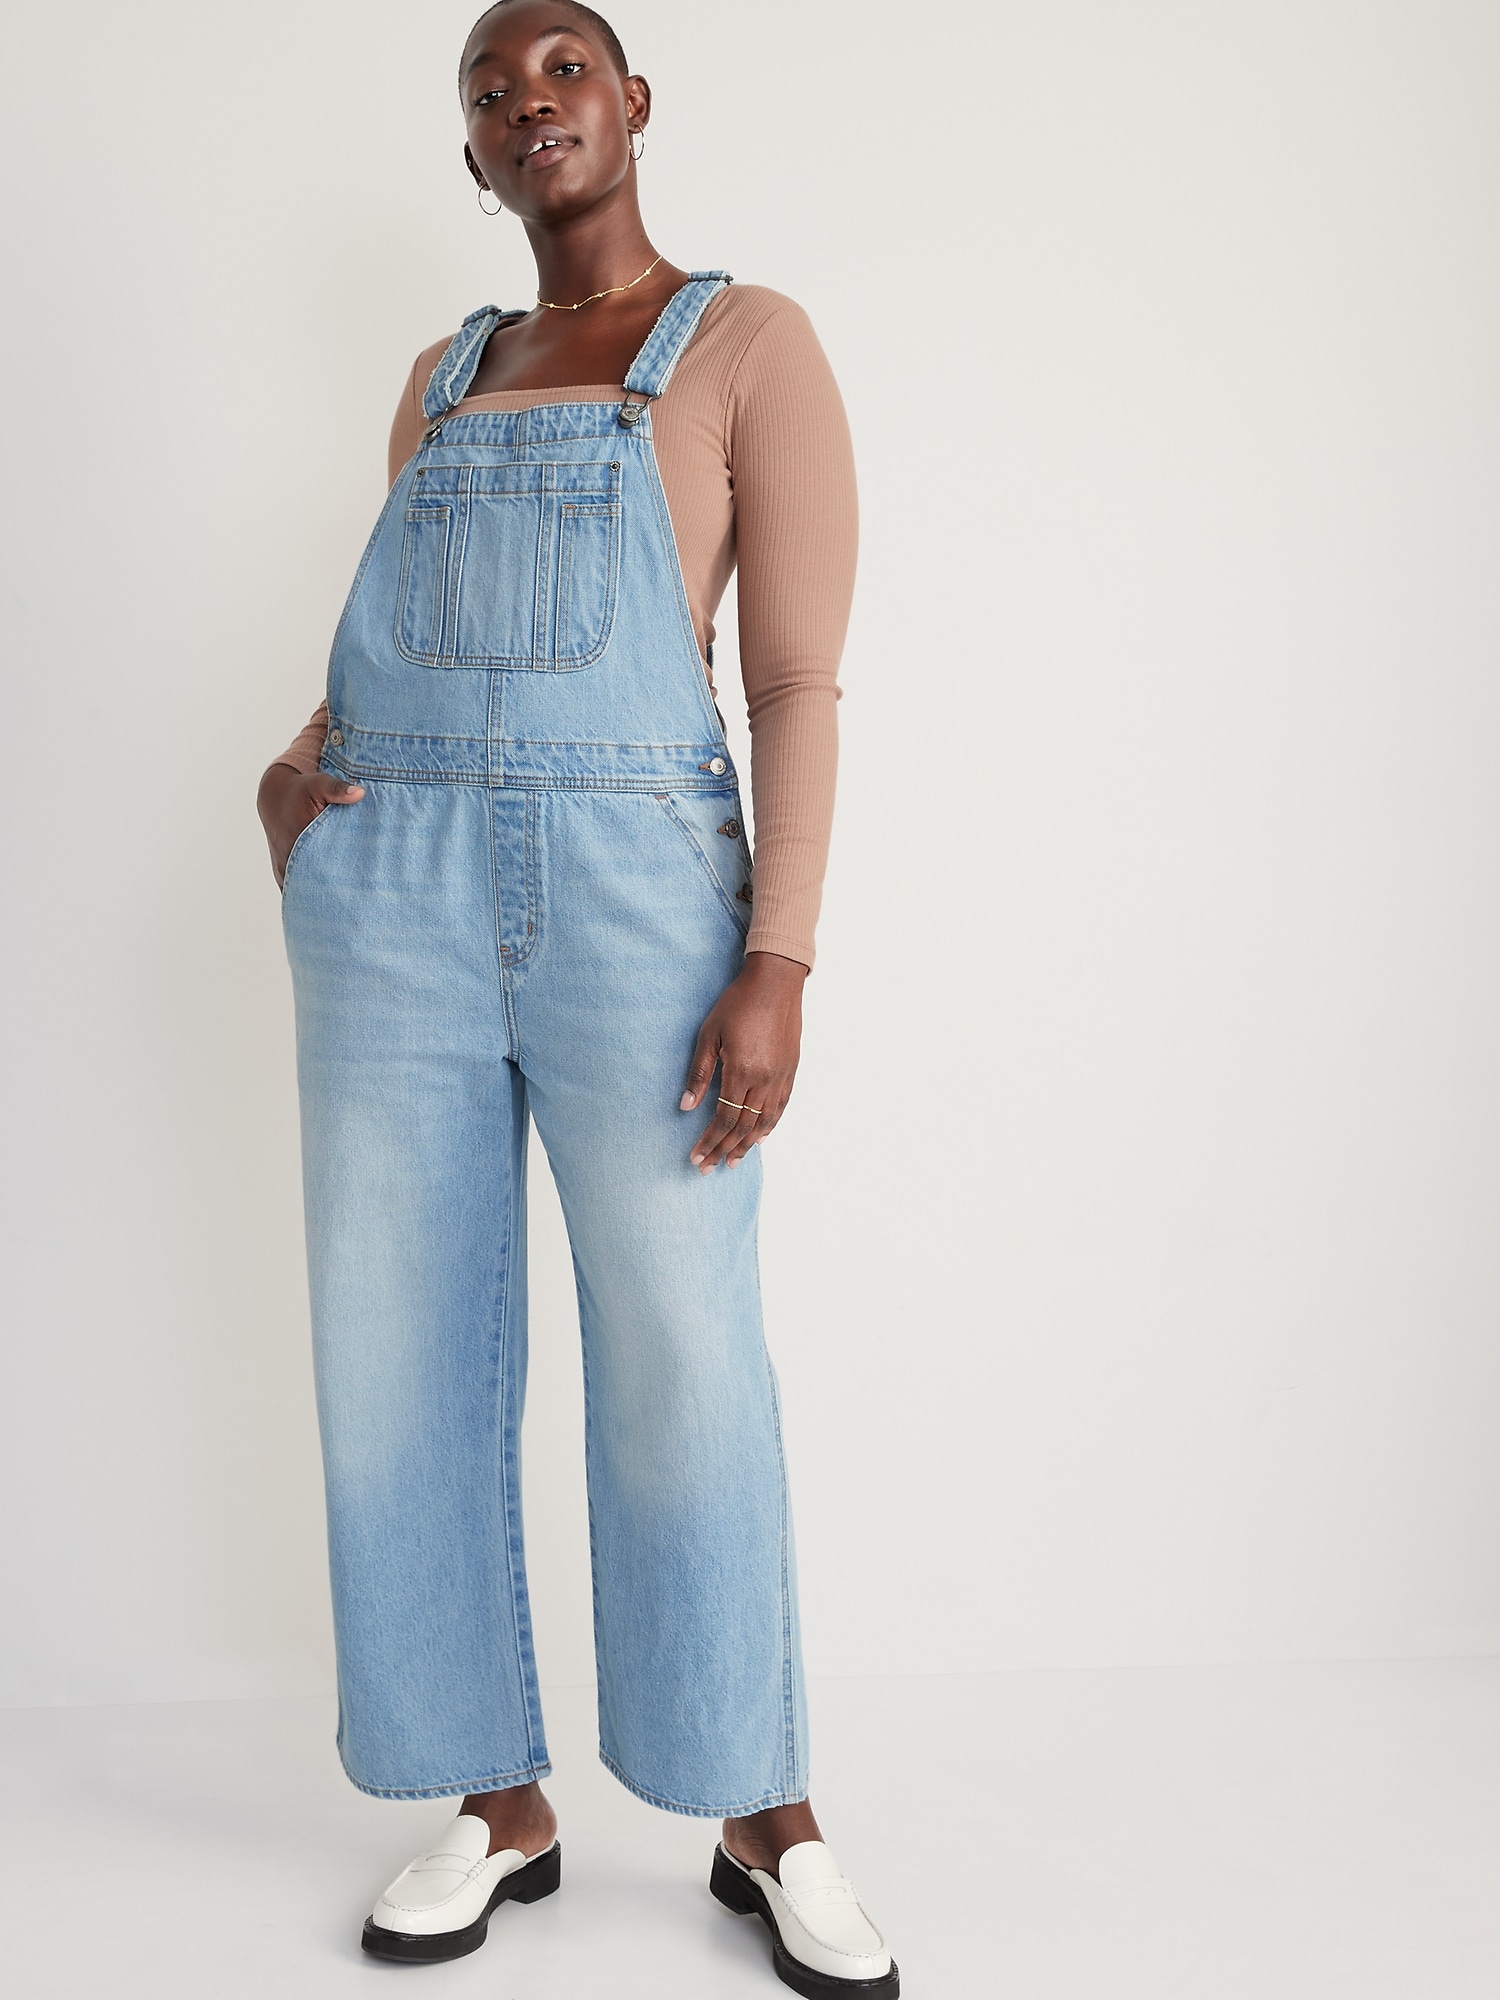 Baggy Wide-Leg Non-Stretch Jean Overalls for Women